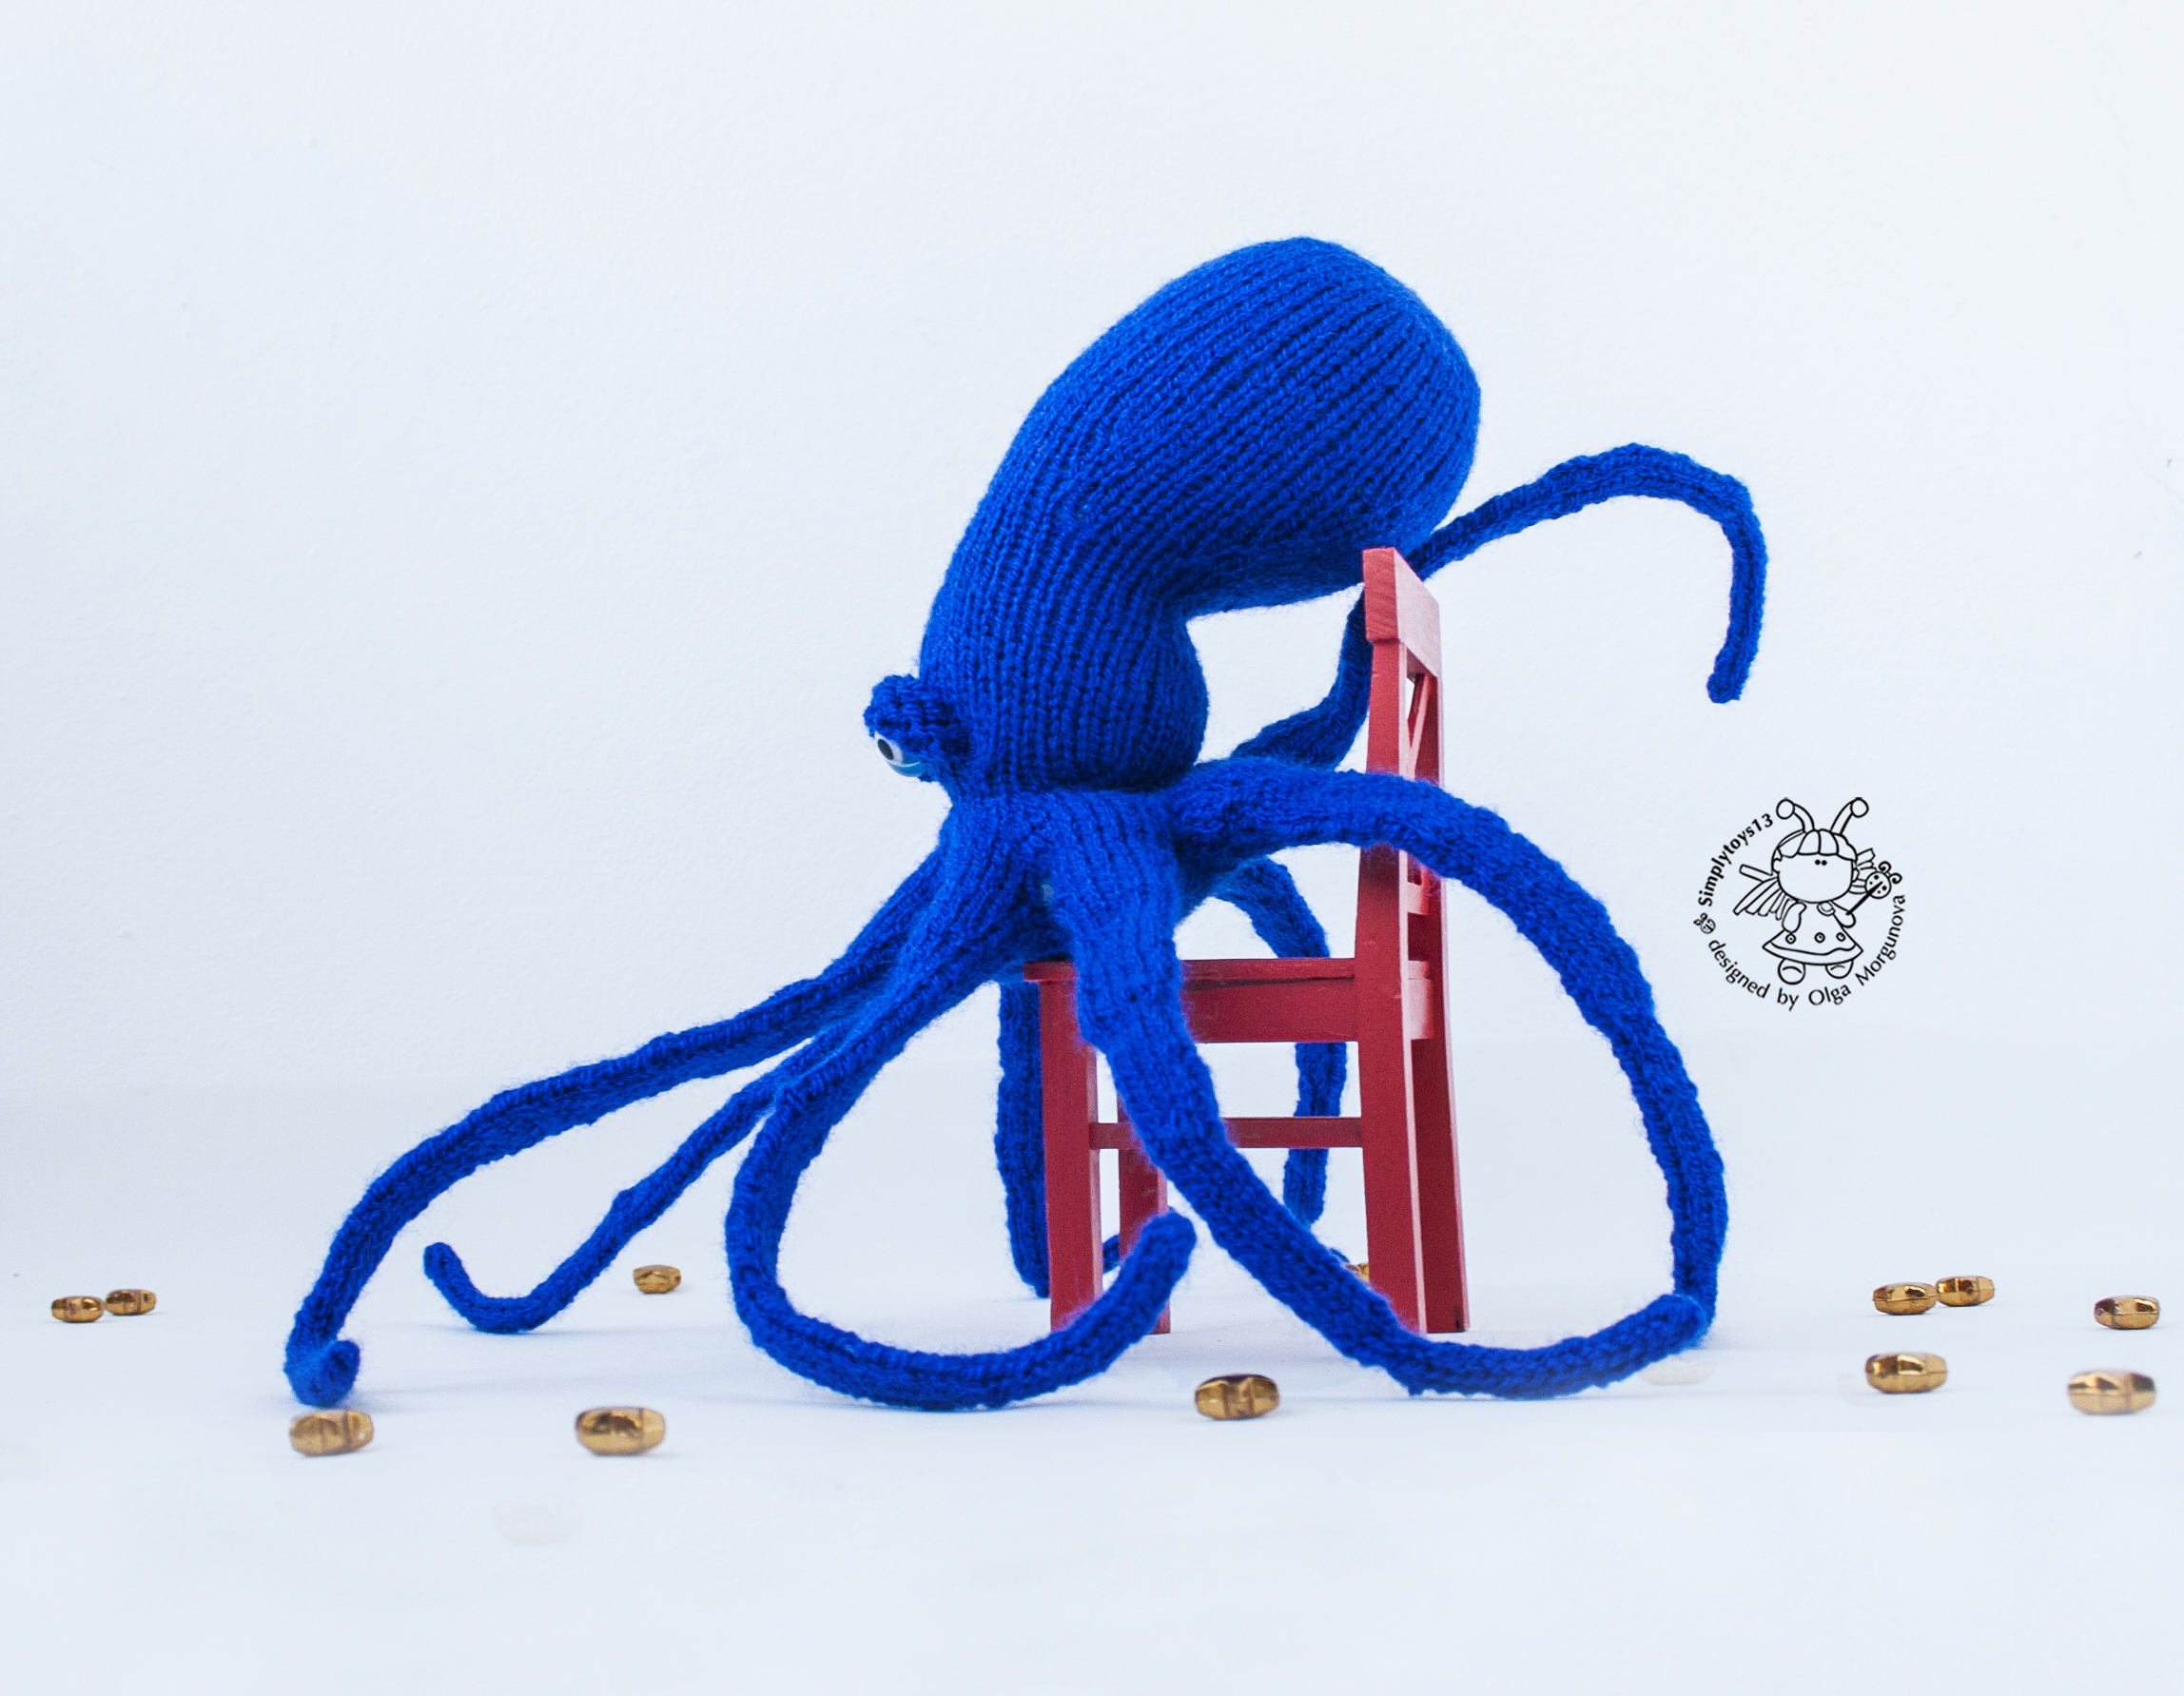 Octopus Knitting Pattern Octopus Toy Amigurumi Octopus Pdf Instant Download Knitting Pattern Knitted Round Cute Octopus Knitted Octopus Fish Aquatic A Unique Gift